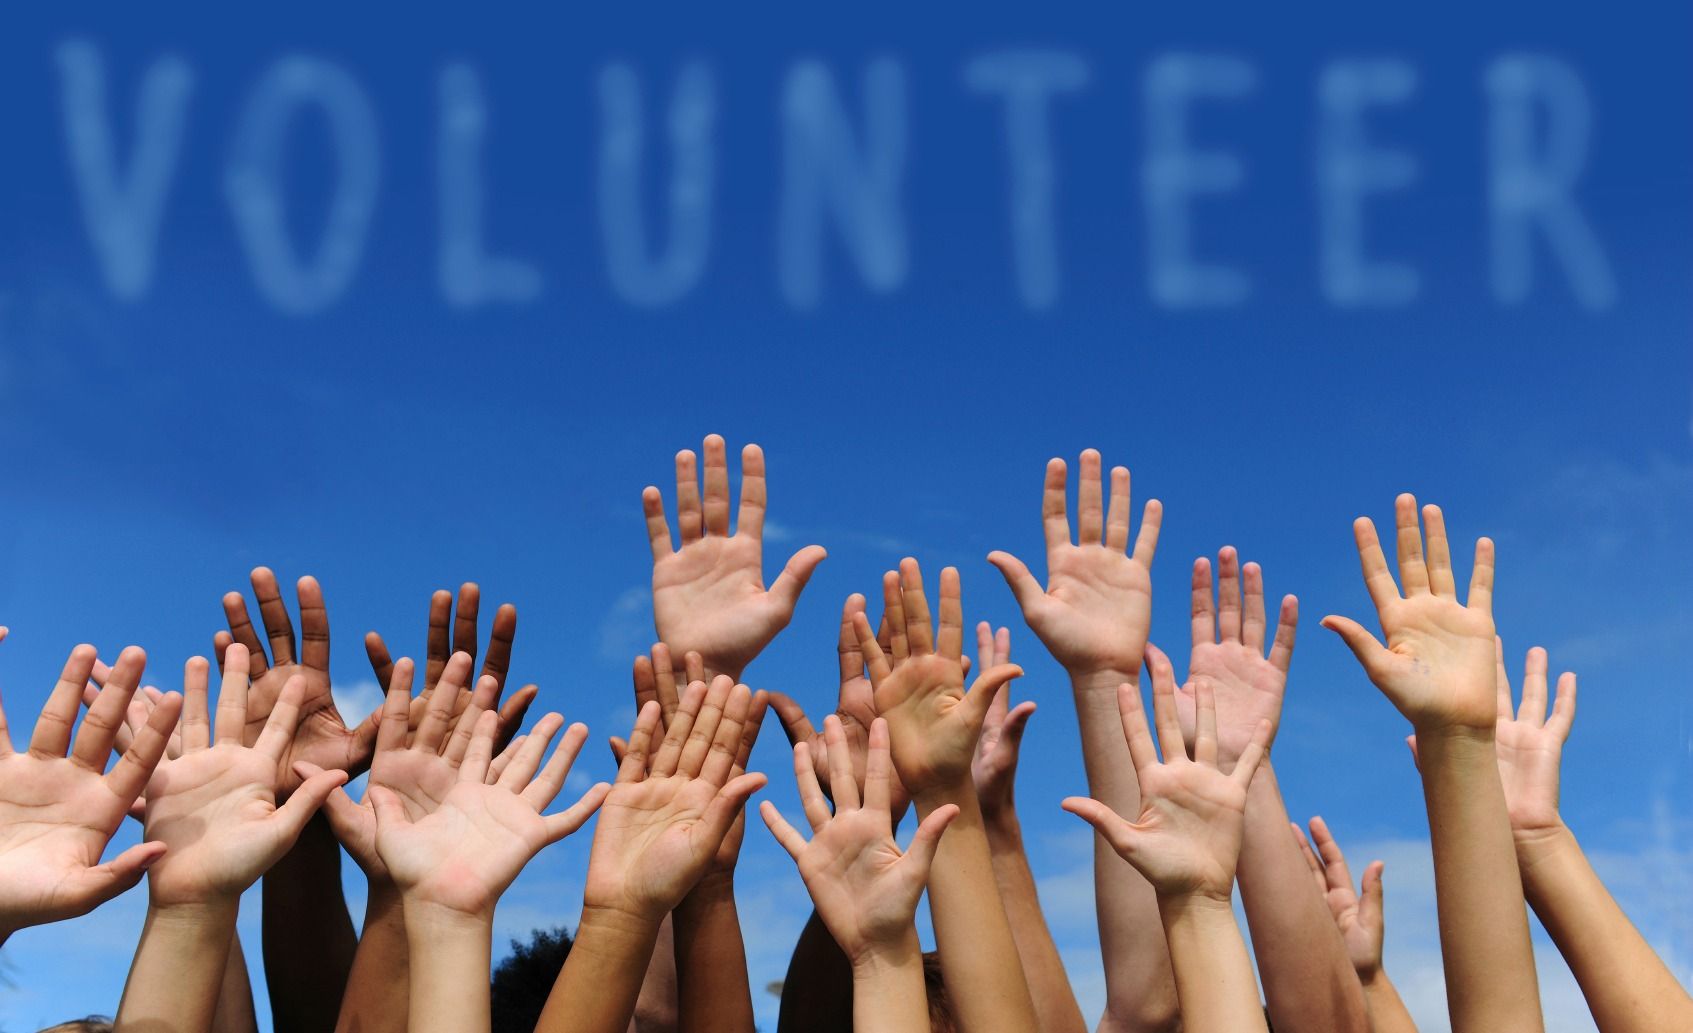 Make a difference with your free time... volunteer!